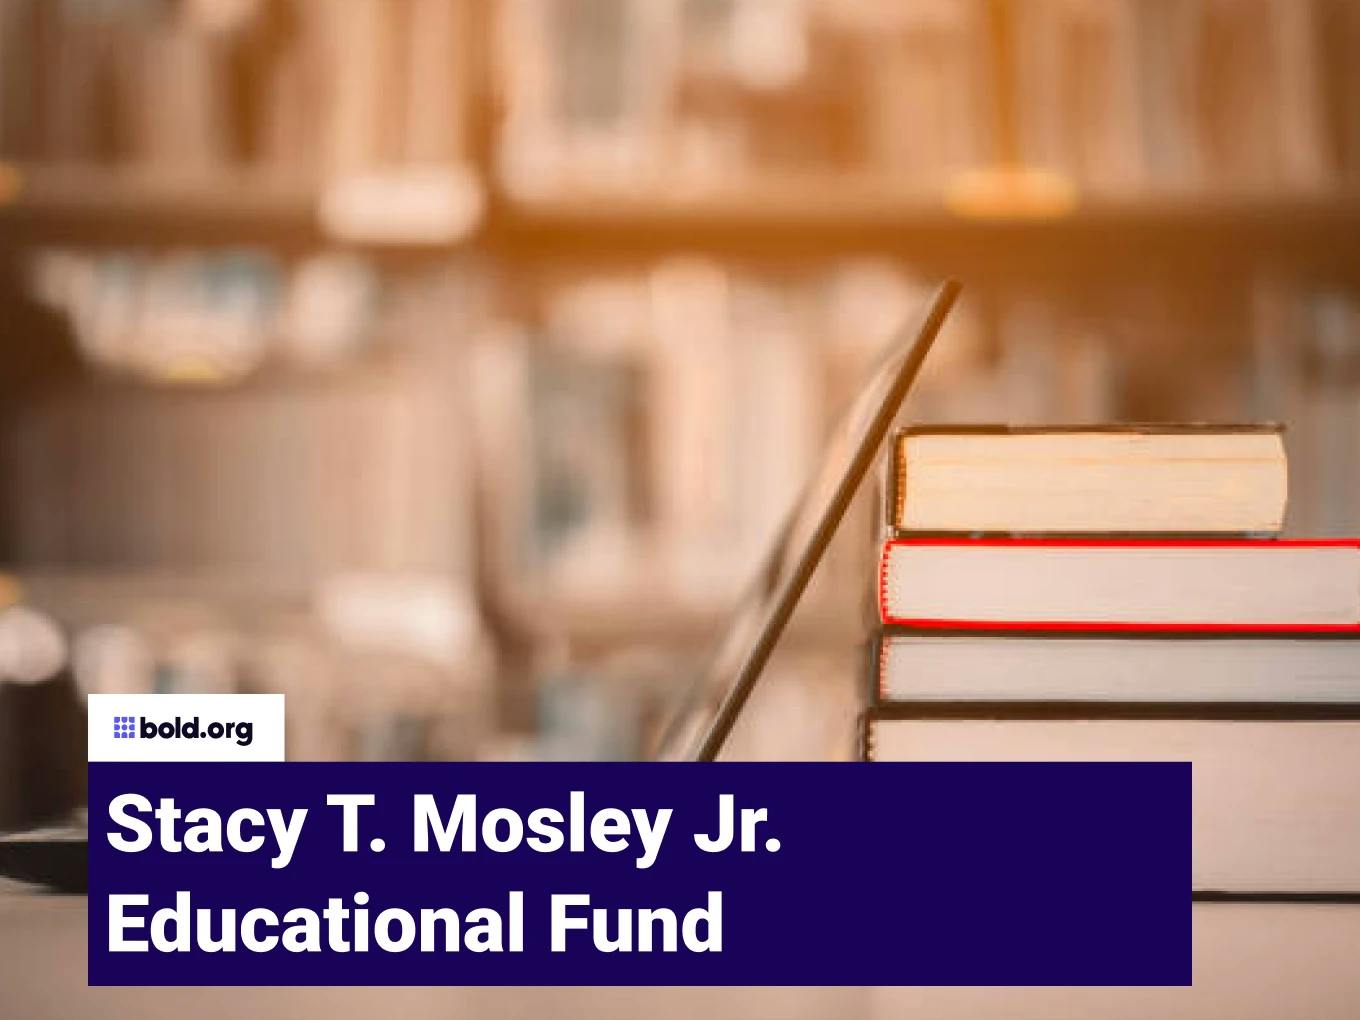 Stacy T. Mosley Jr. Educational Fund